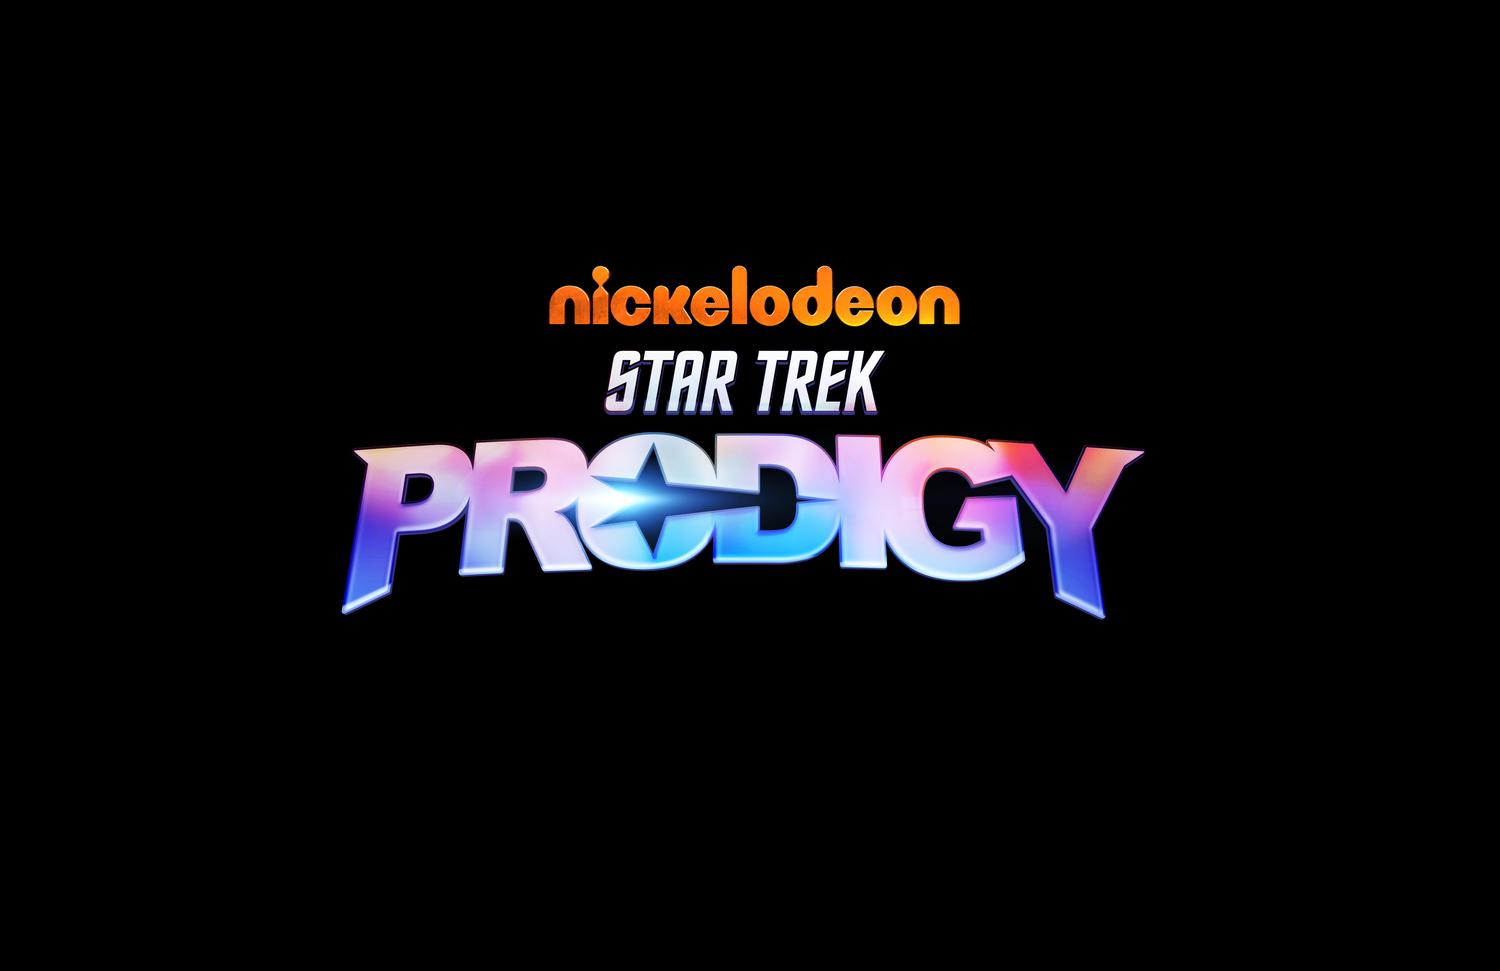 CBS Television Announce Star Trek: Prodigy For Nickelodeon